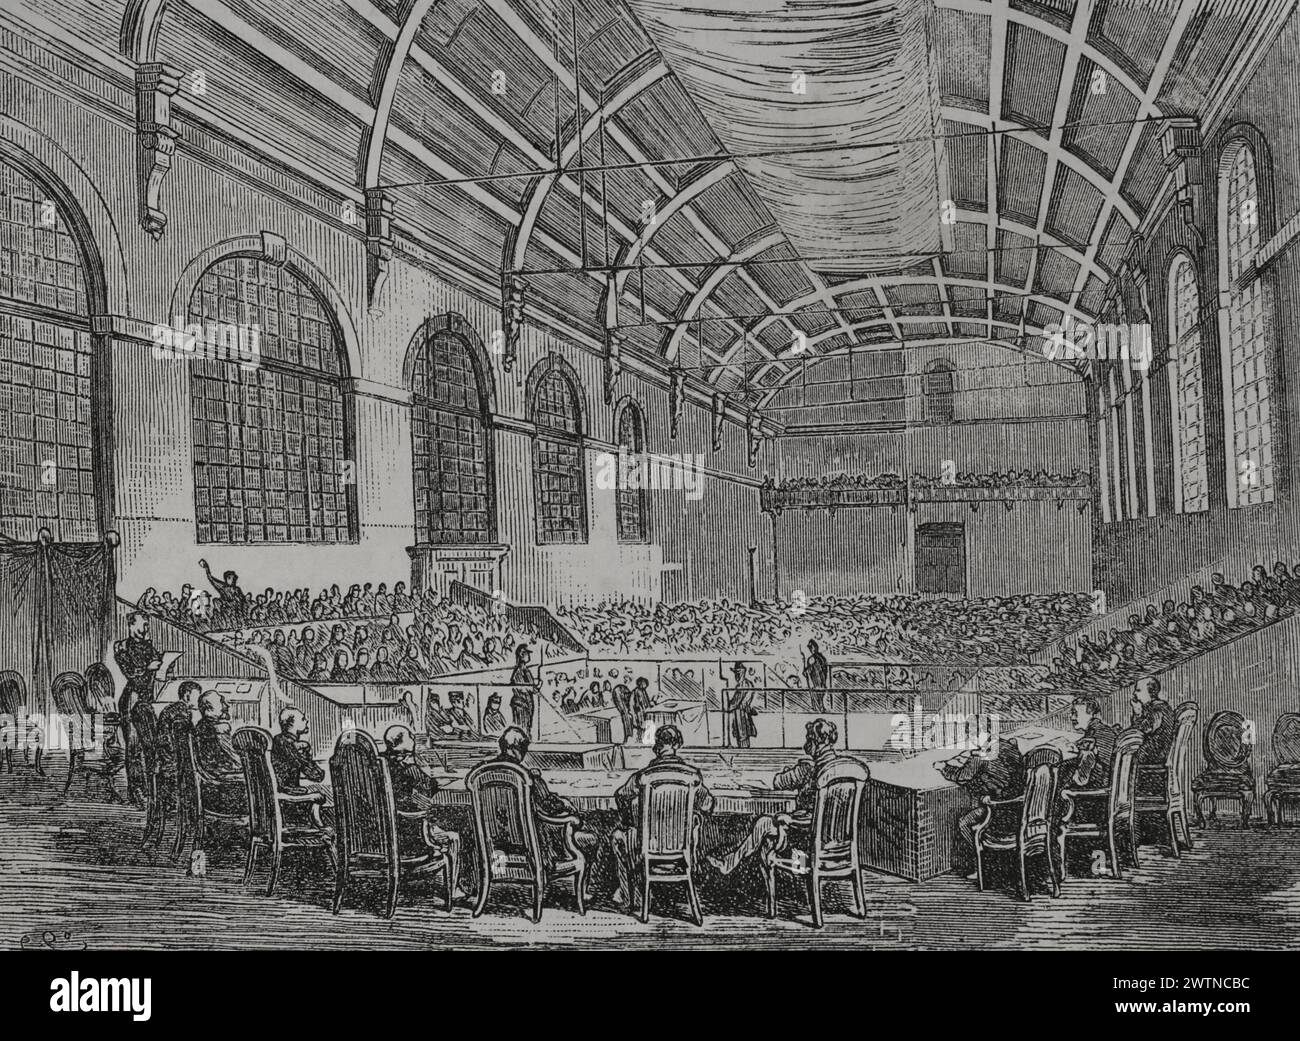 France. Paris Commune. Popular revolutionary movement that took power in Paris from 18 March to 28 May 1871, as a result of the Franco-Prussian War. Trial of the Paris Commune. Cases proceedings by the court martial at Versailles against the leaders of the Paris insurrection. Session room of the third council of war at Versailles. 6 August 1871. Engraving. 'Historia de la Guerra de Francia y Prusia' (History of the War between France and Prussia). Volume II. Published in Barcelona, 1871. Stock Photo